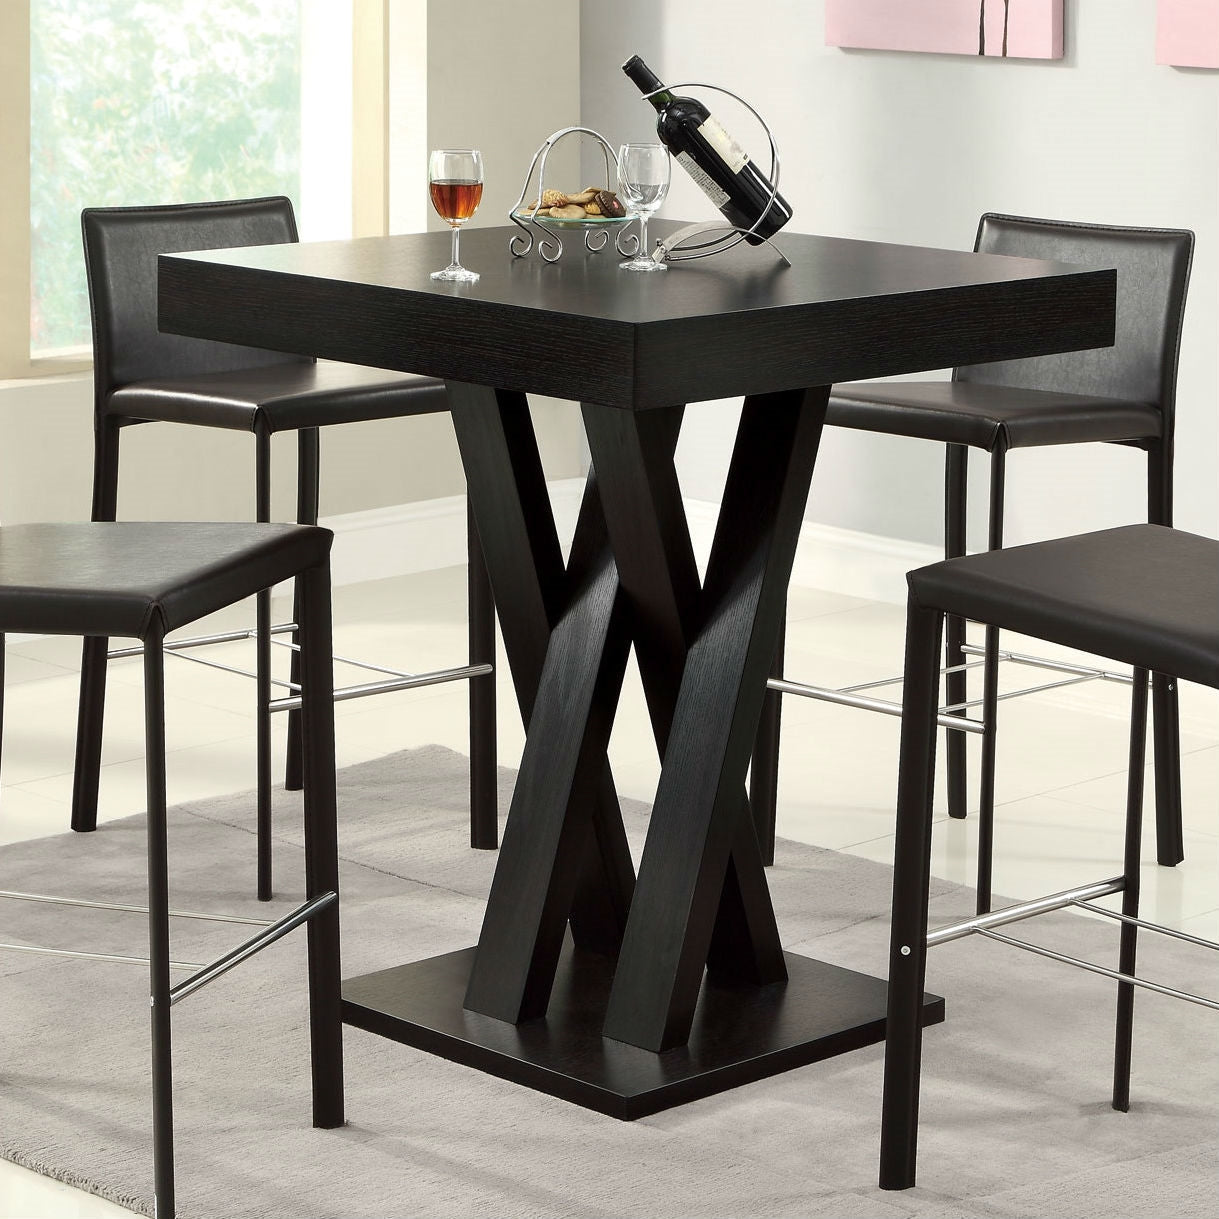 Dining > Dining Tables - Modern 40-inch High Square Dining Table In Dark Cappuccino Finish